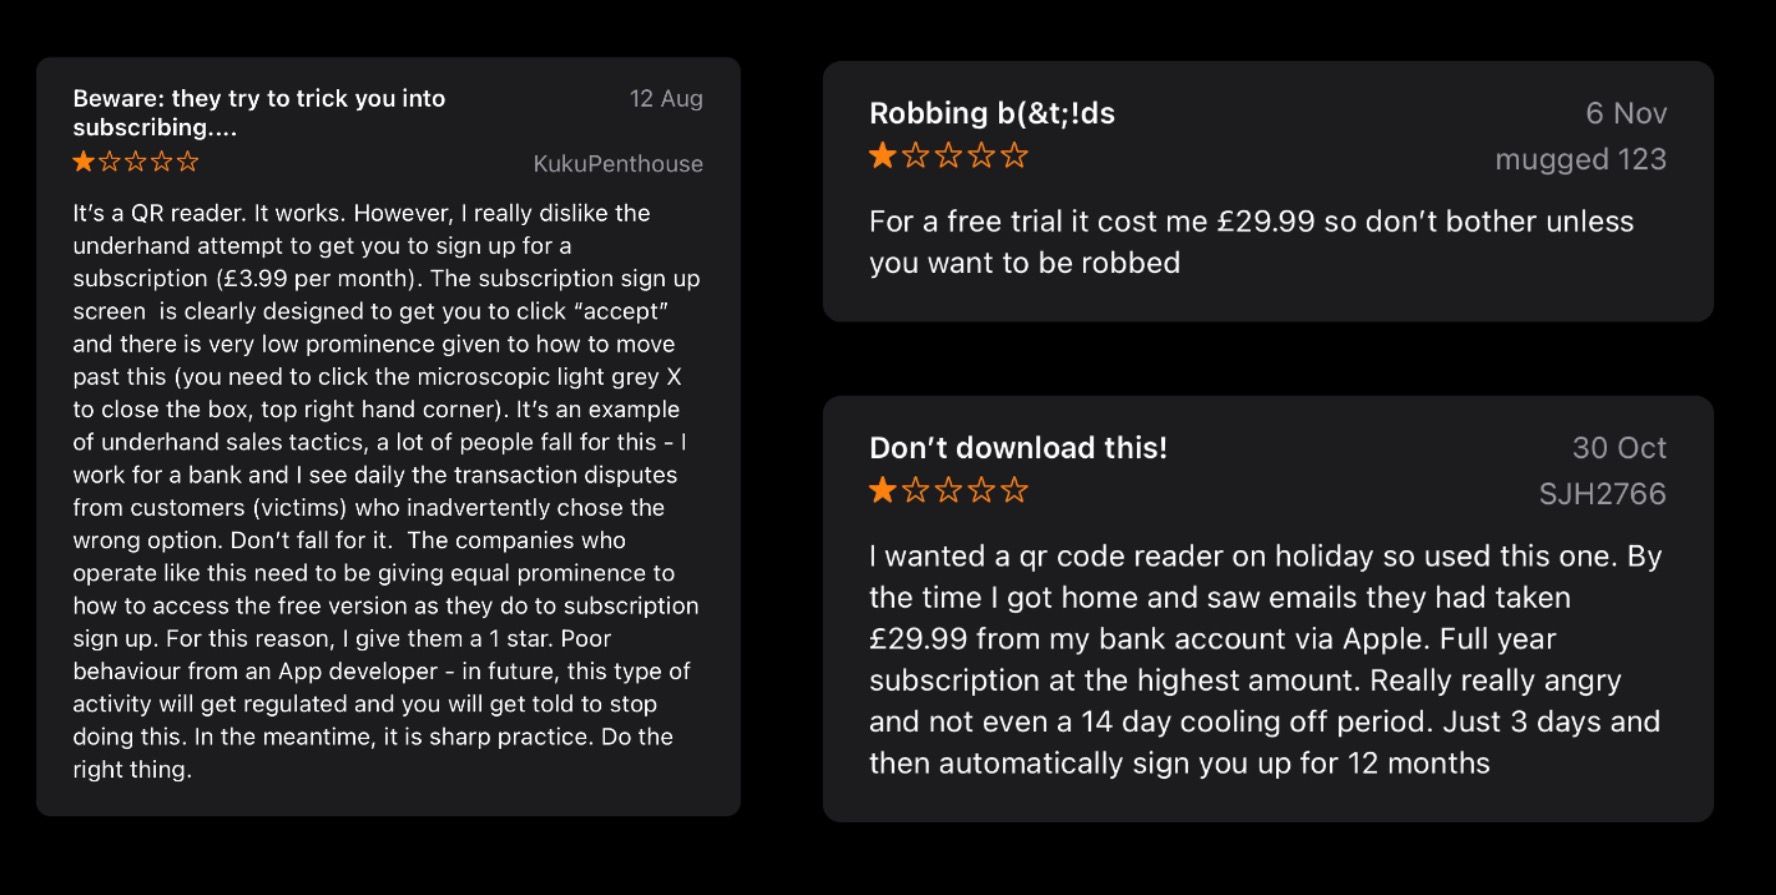 Recent reviews for a scam QR code reader that currently charges £29.99 a year after a 3 day trial